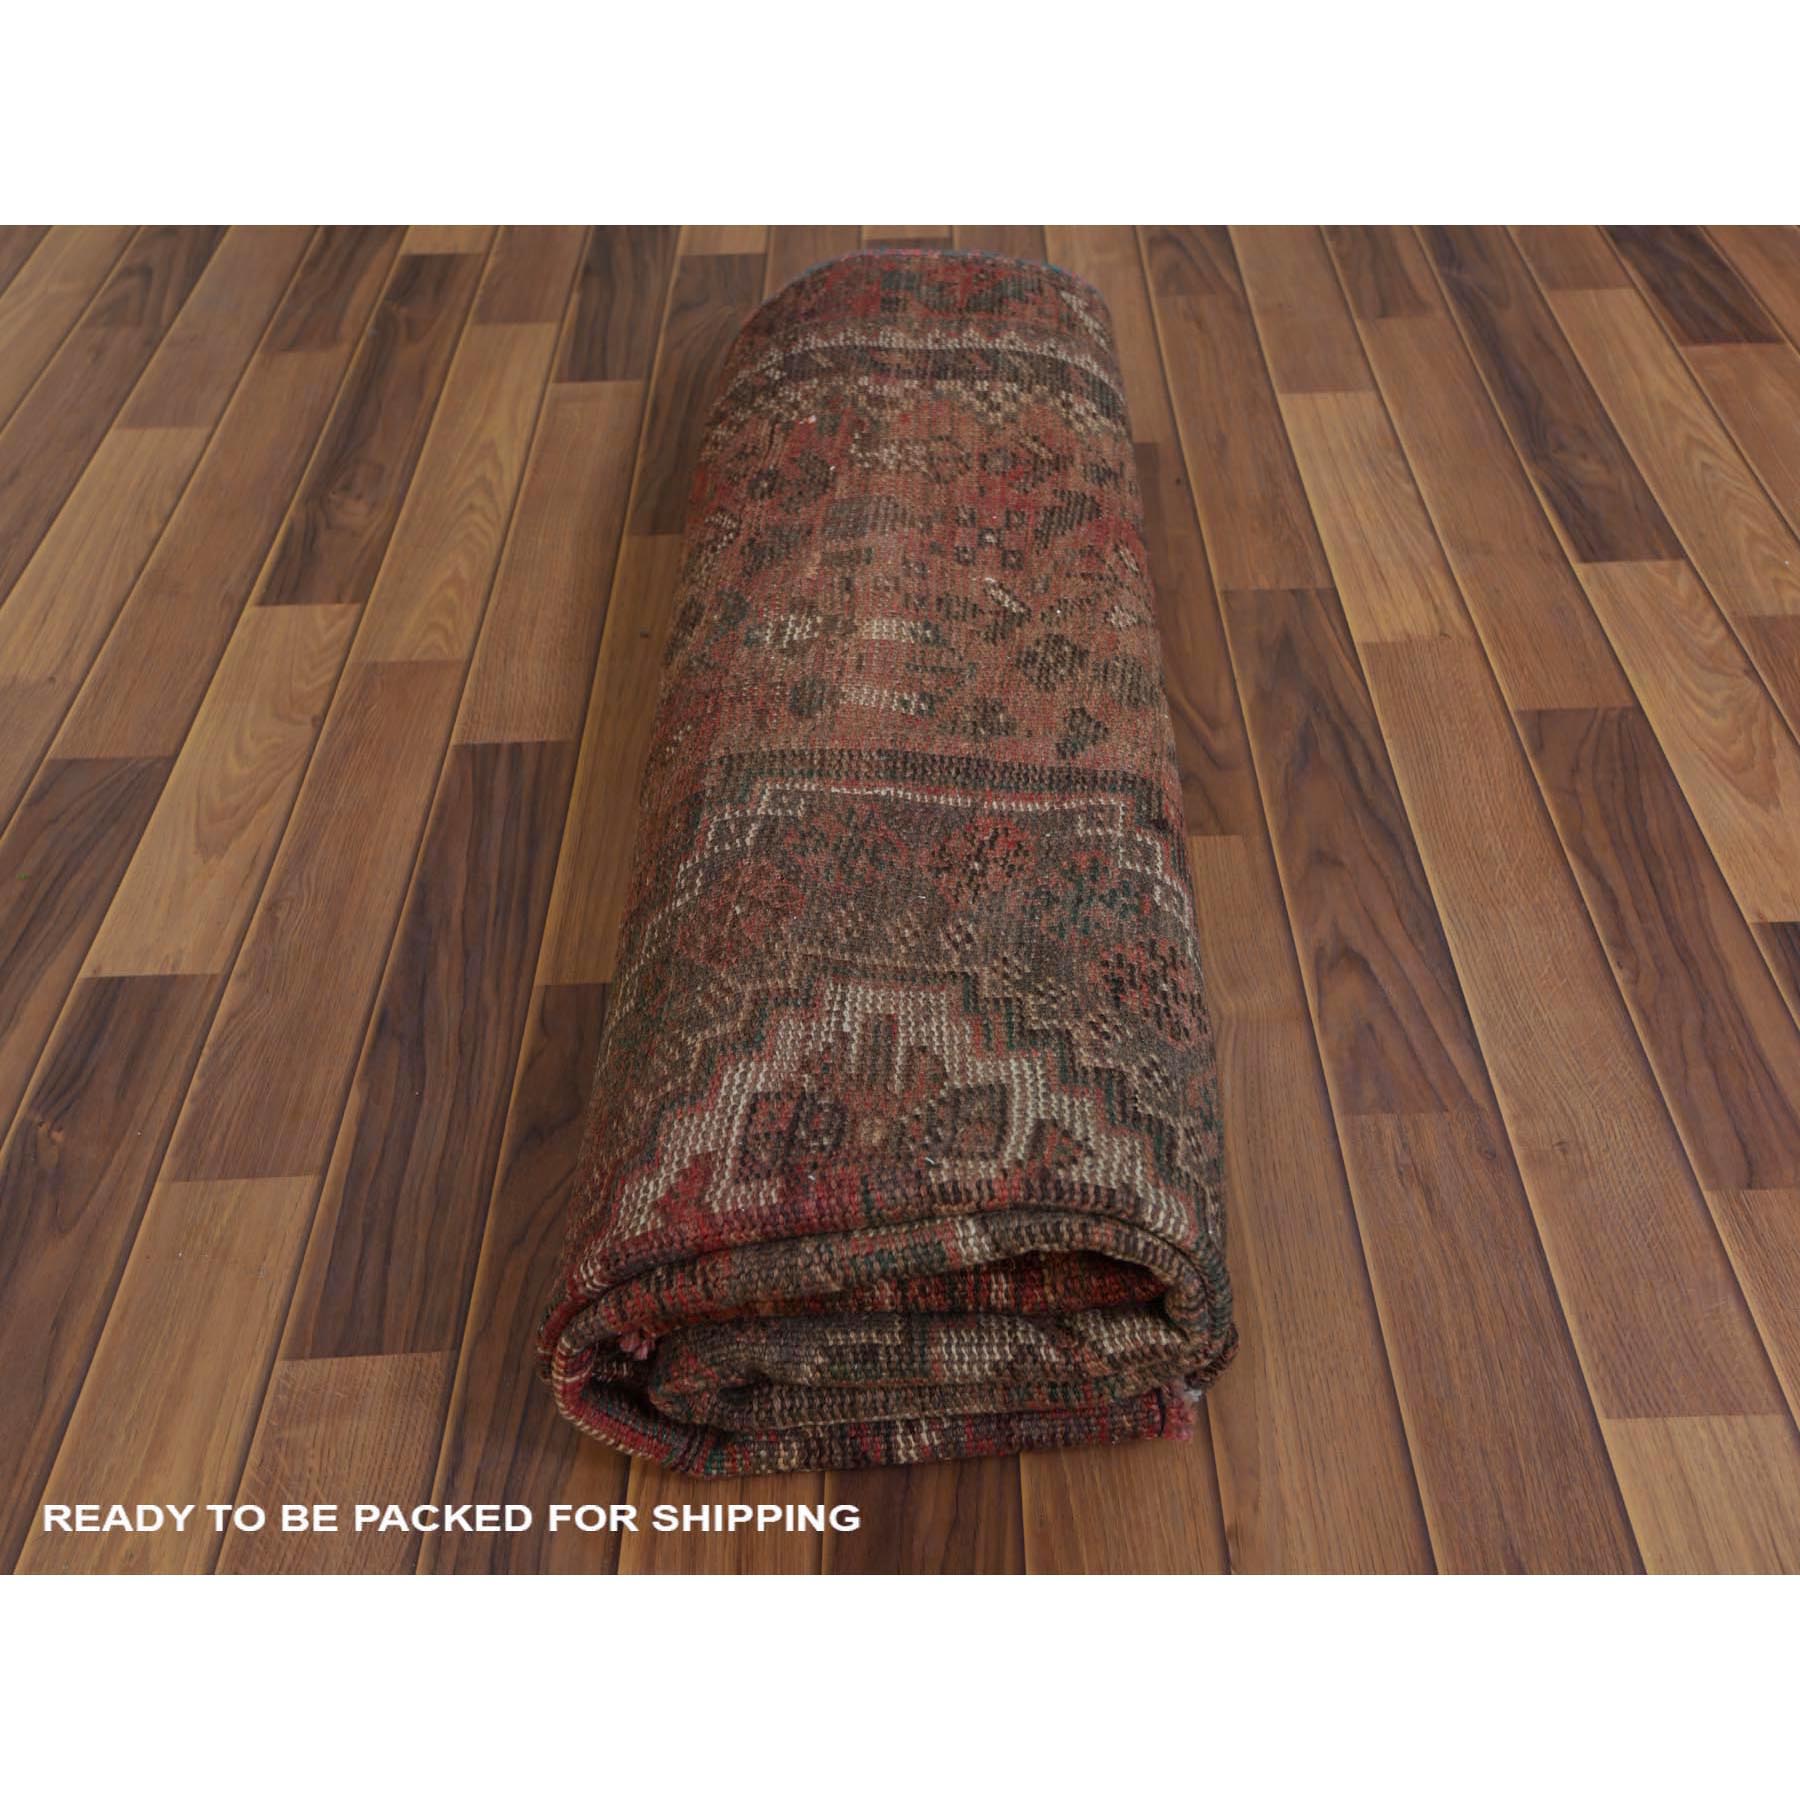 Overdyed-Vintage-Hand-Knotted-Rug-288915